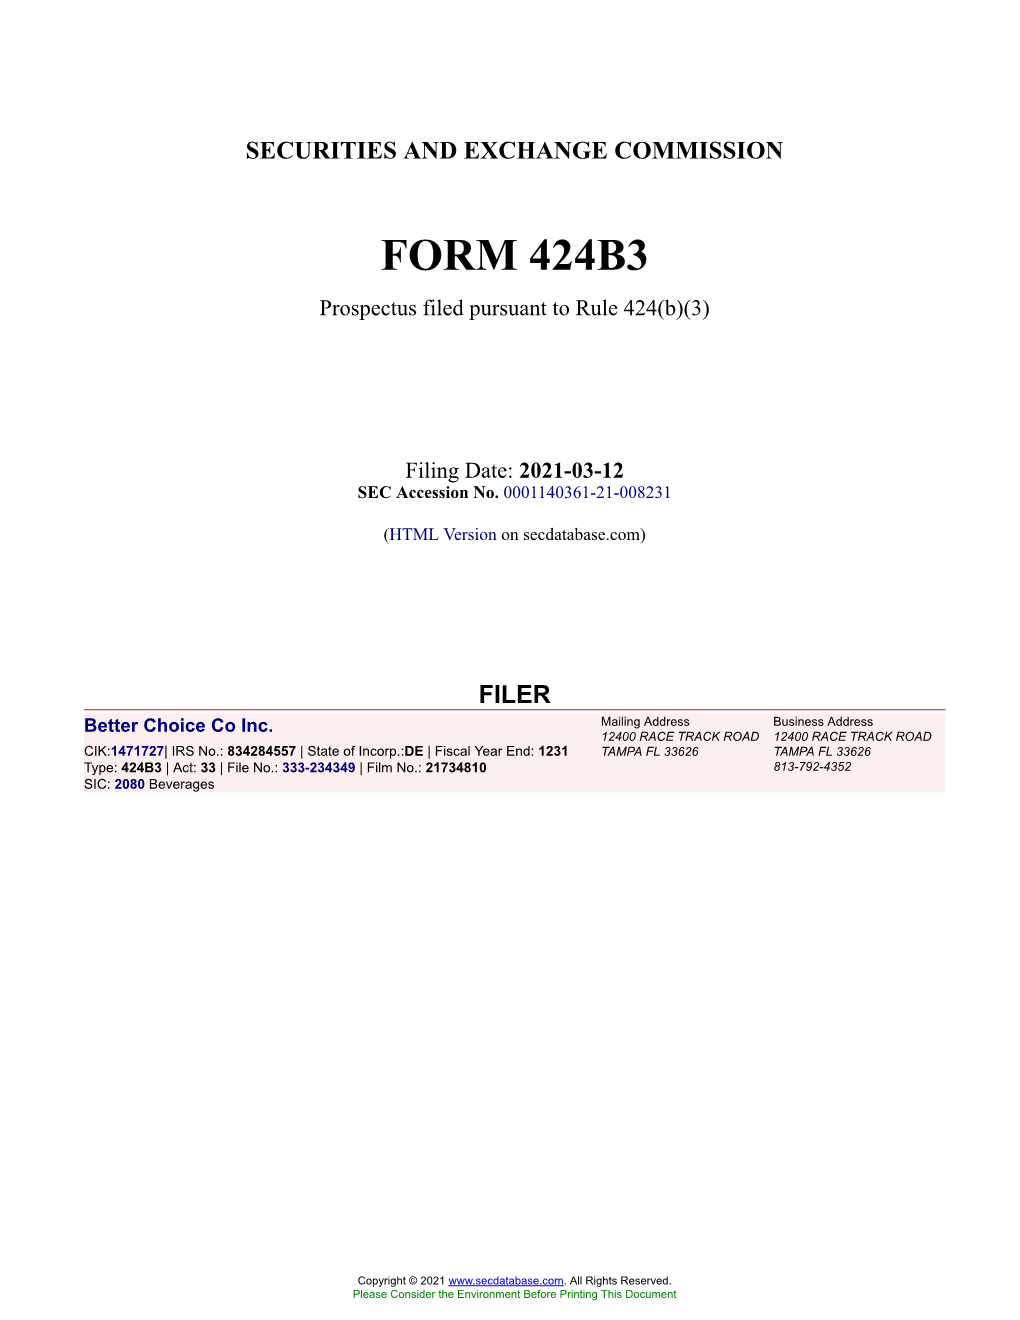 Better Choice Co Inc. Form 424B3 Filed 2021-03-12